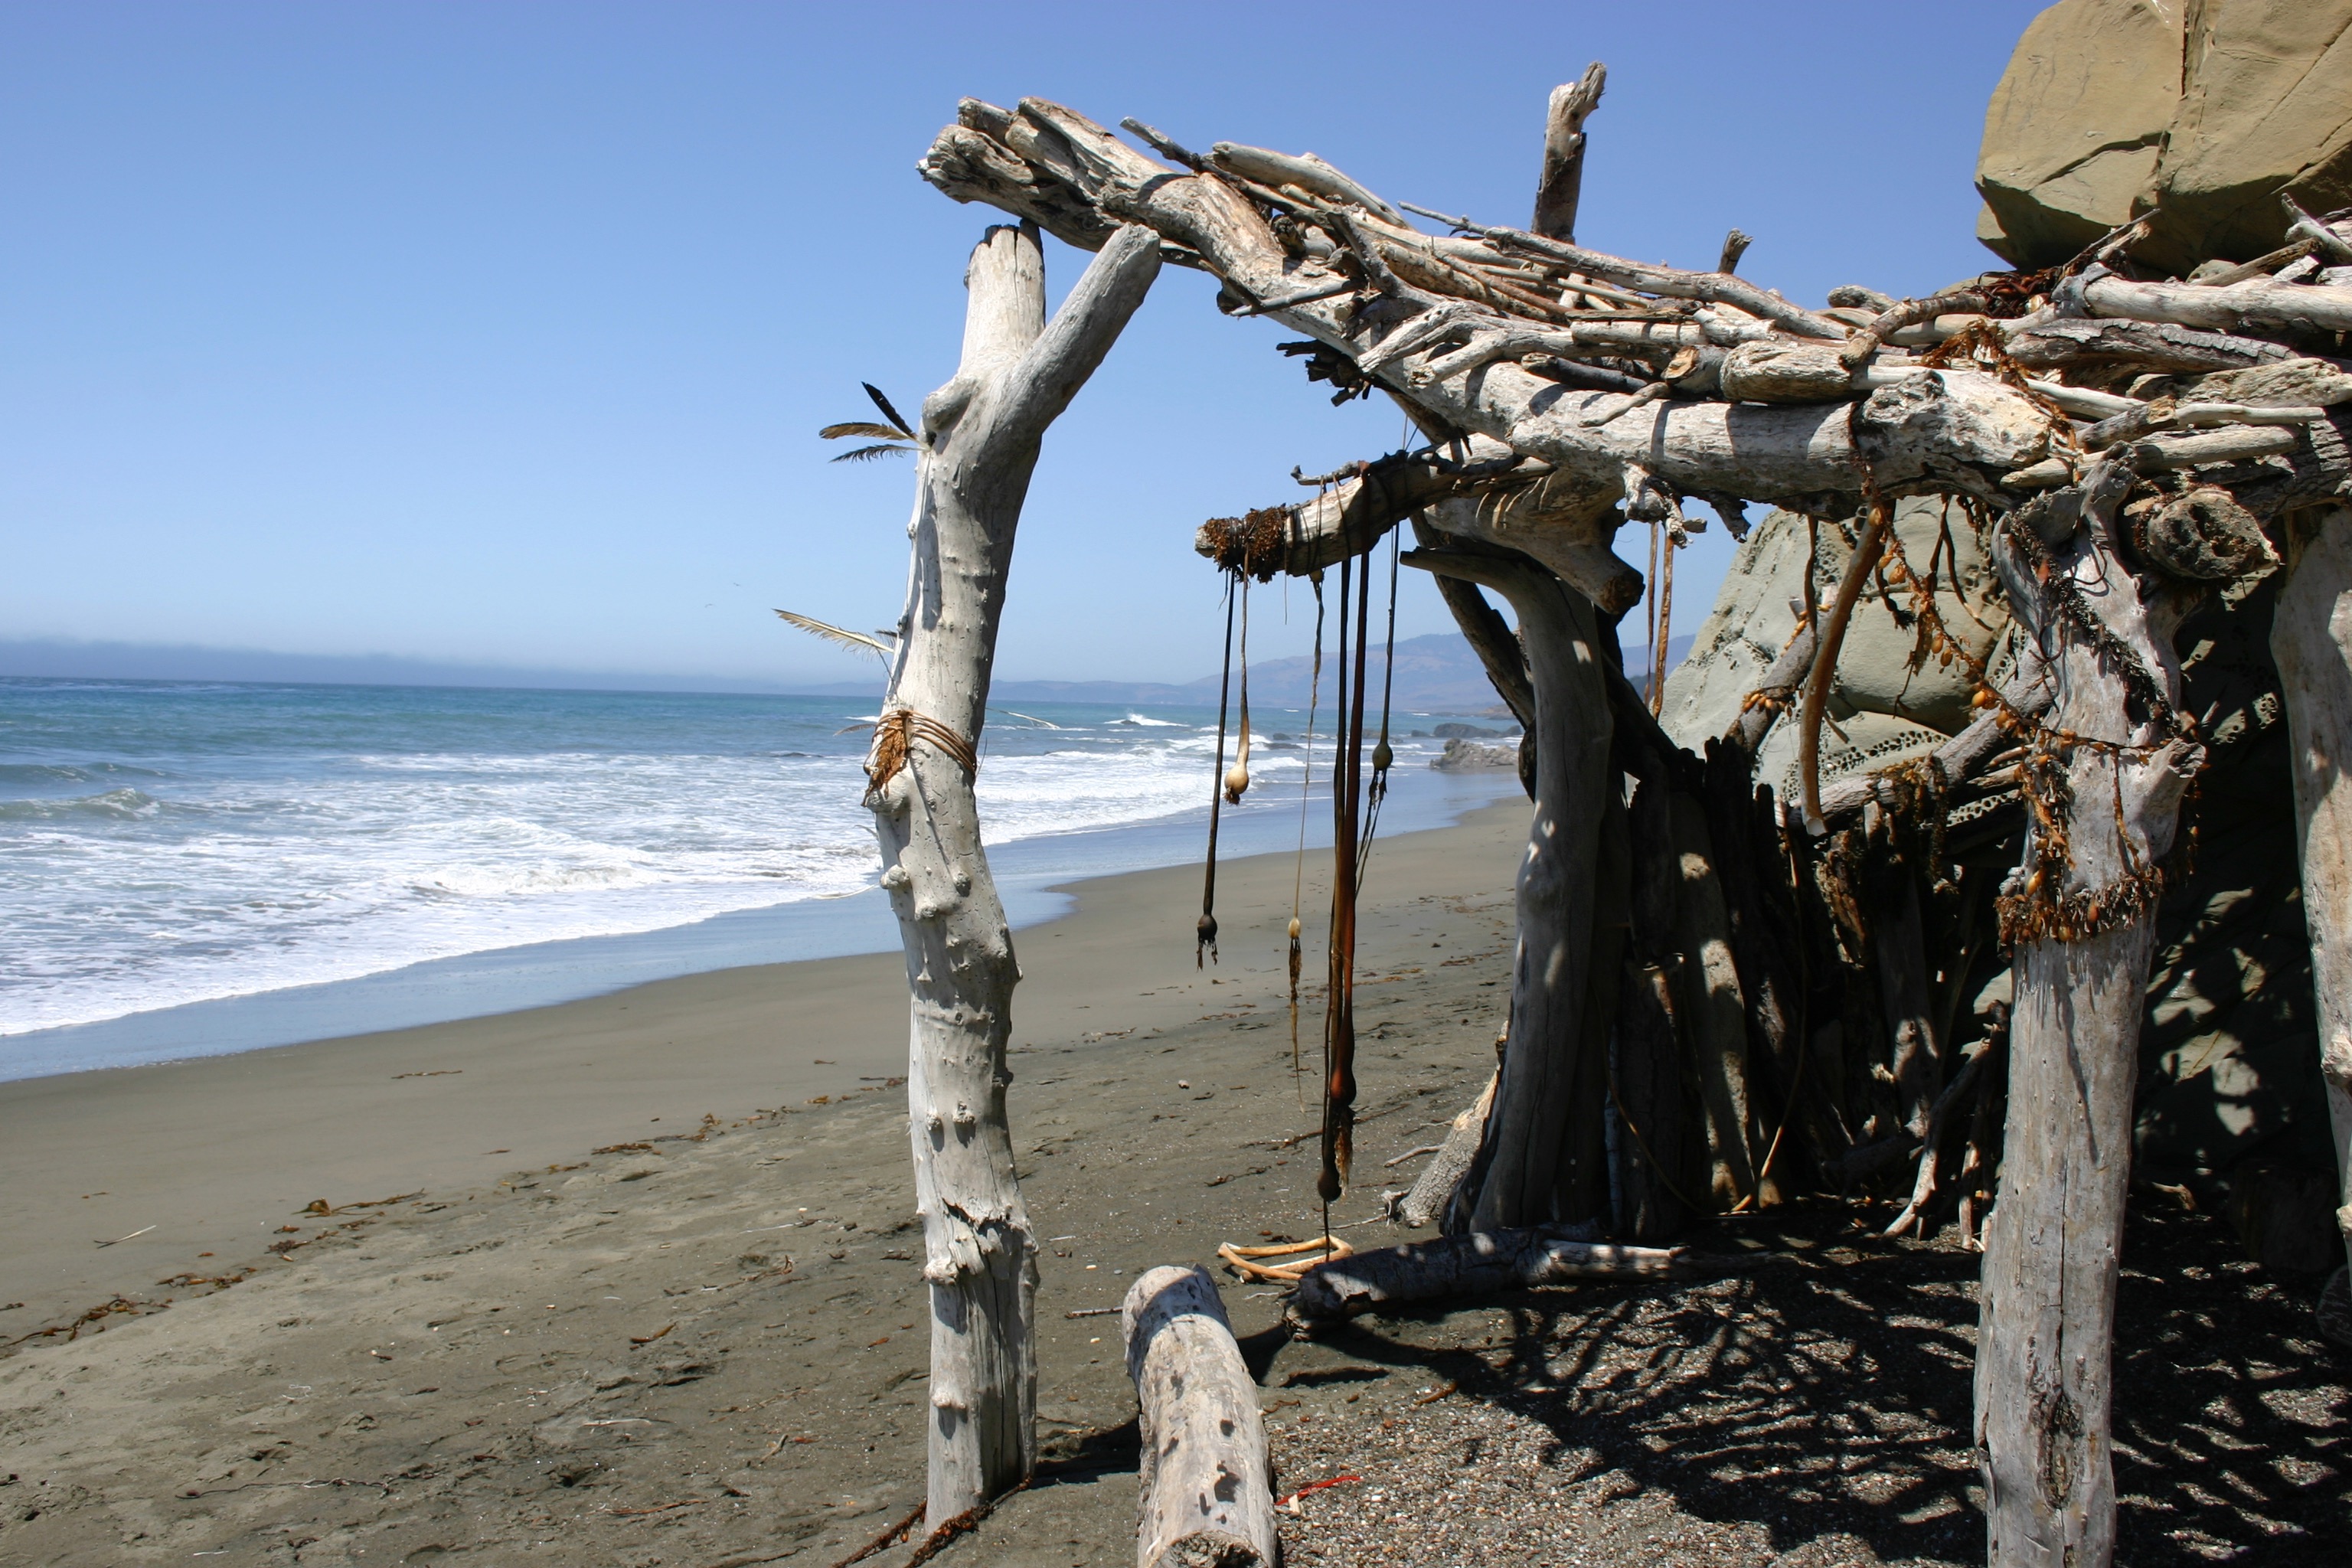 A hut constructed of driftwood and seaweed on the beach. 